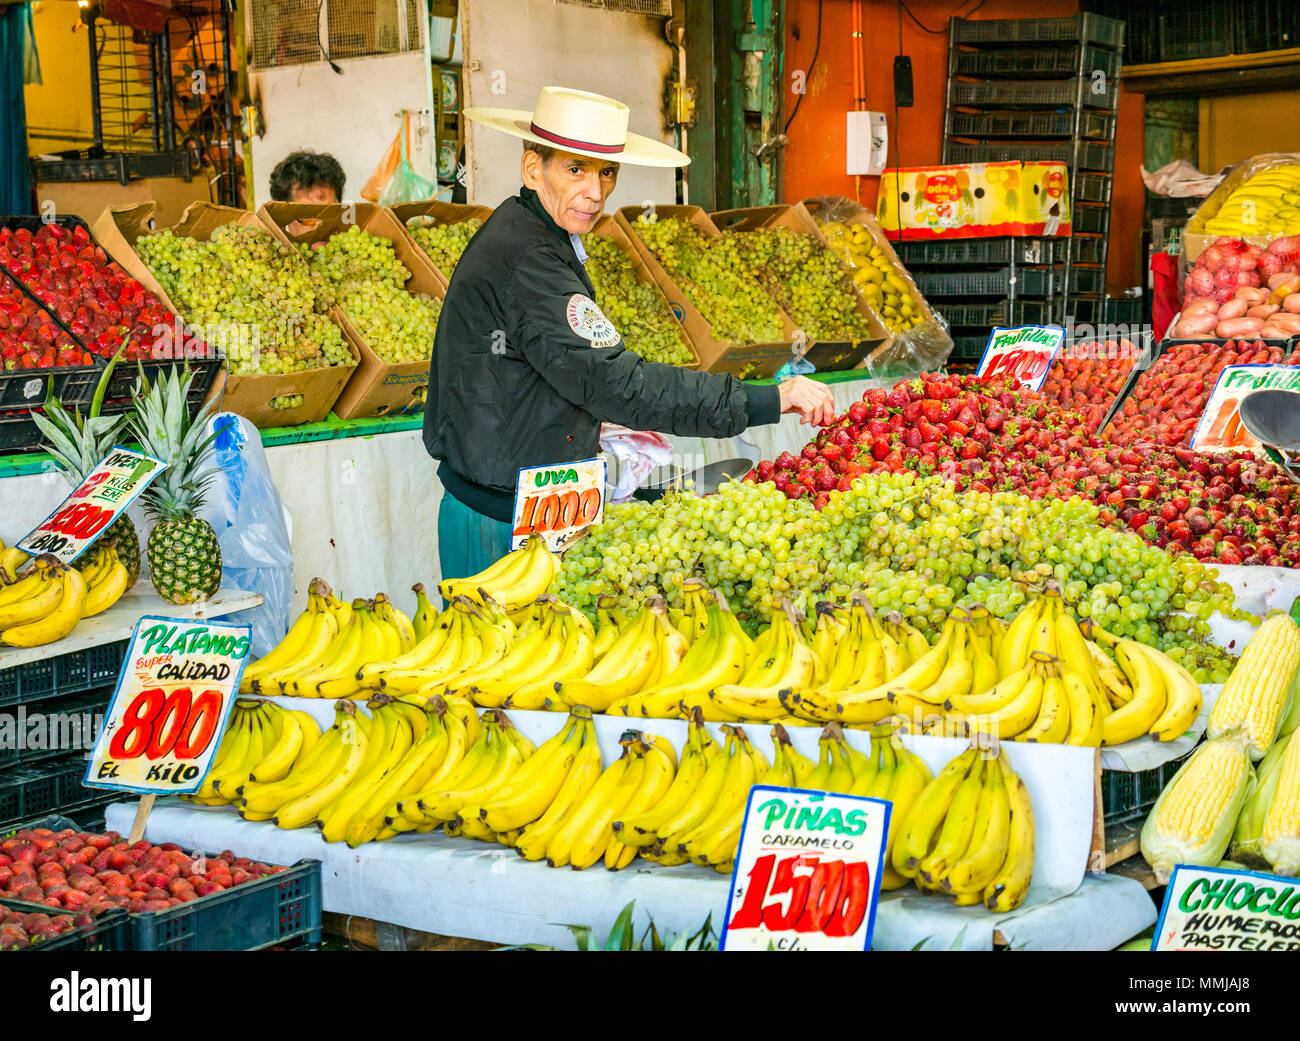 Old man selling bananas, strawberries and grapes wearing traditional Chilean straw hat, Patronata fruit and vegetable market, Santiago, Chile Stock Photo